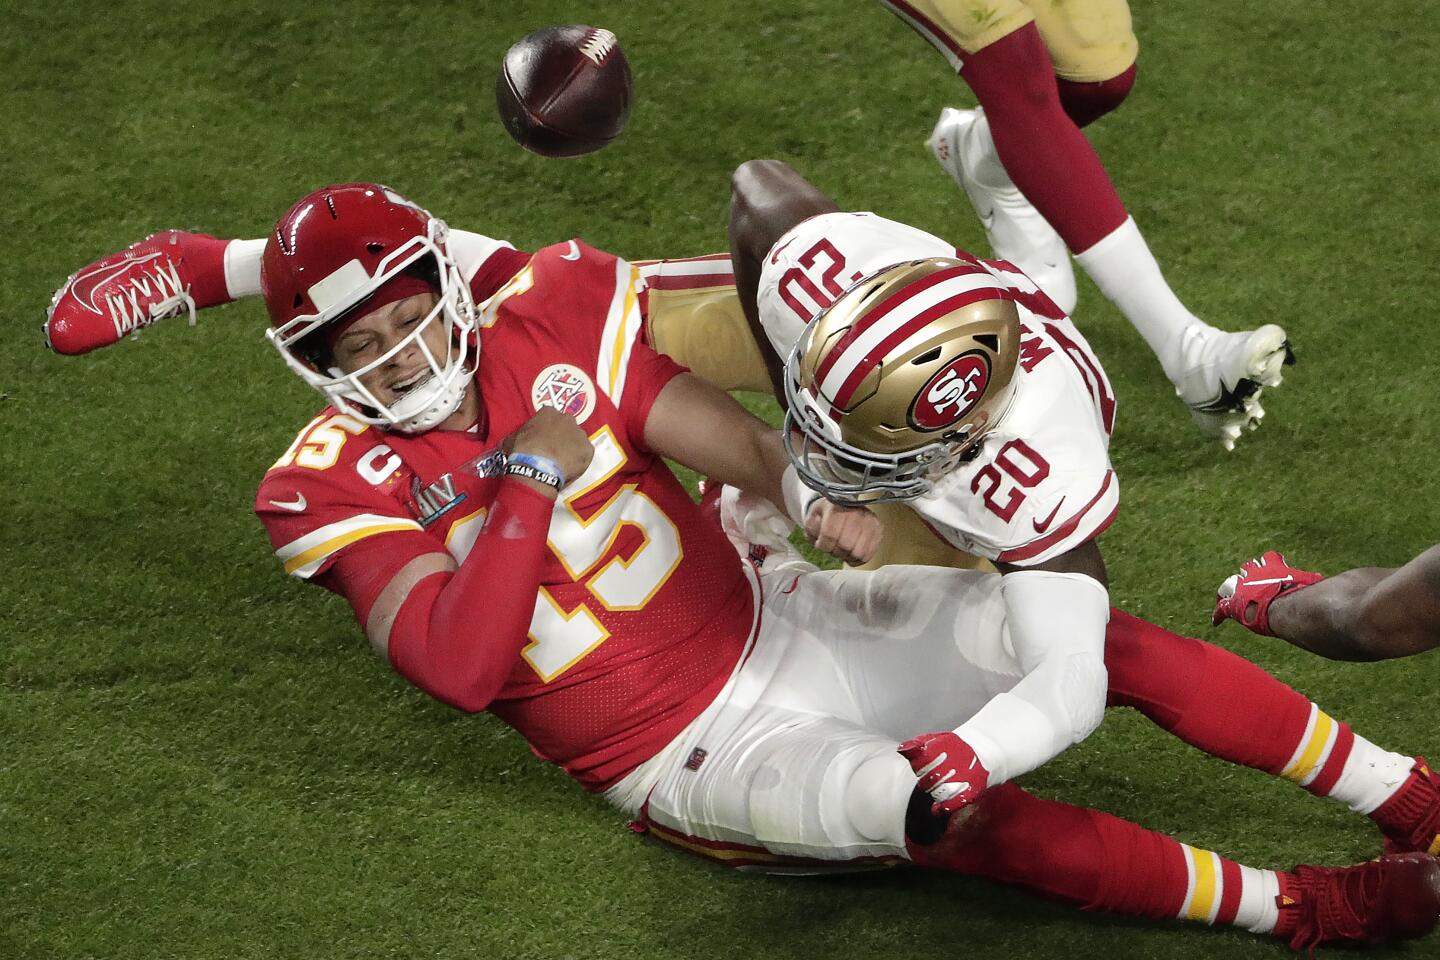 San Francisco 49ers defensive back Jimmie Ward, right, knocks the ball from the hands of Kansas City Chiefs quarterback Patrick Mahomes during the first half.